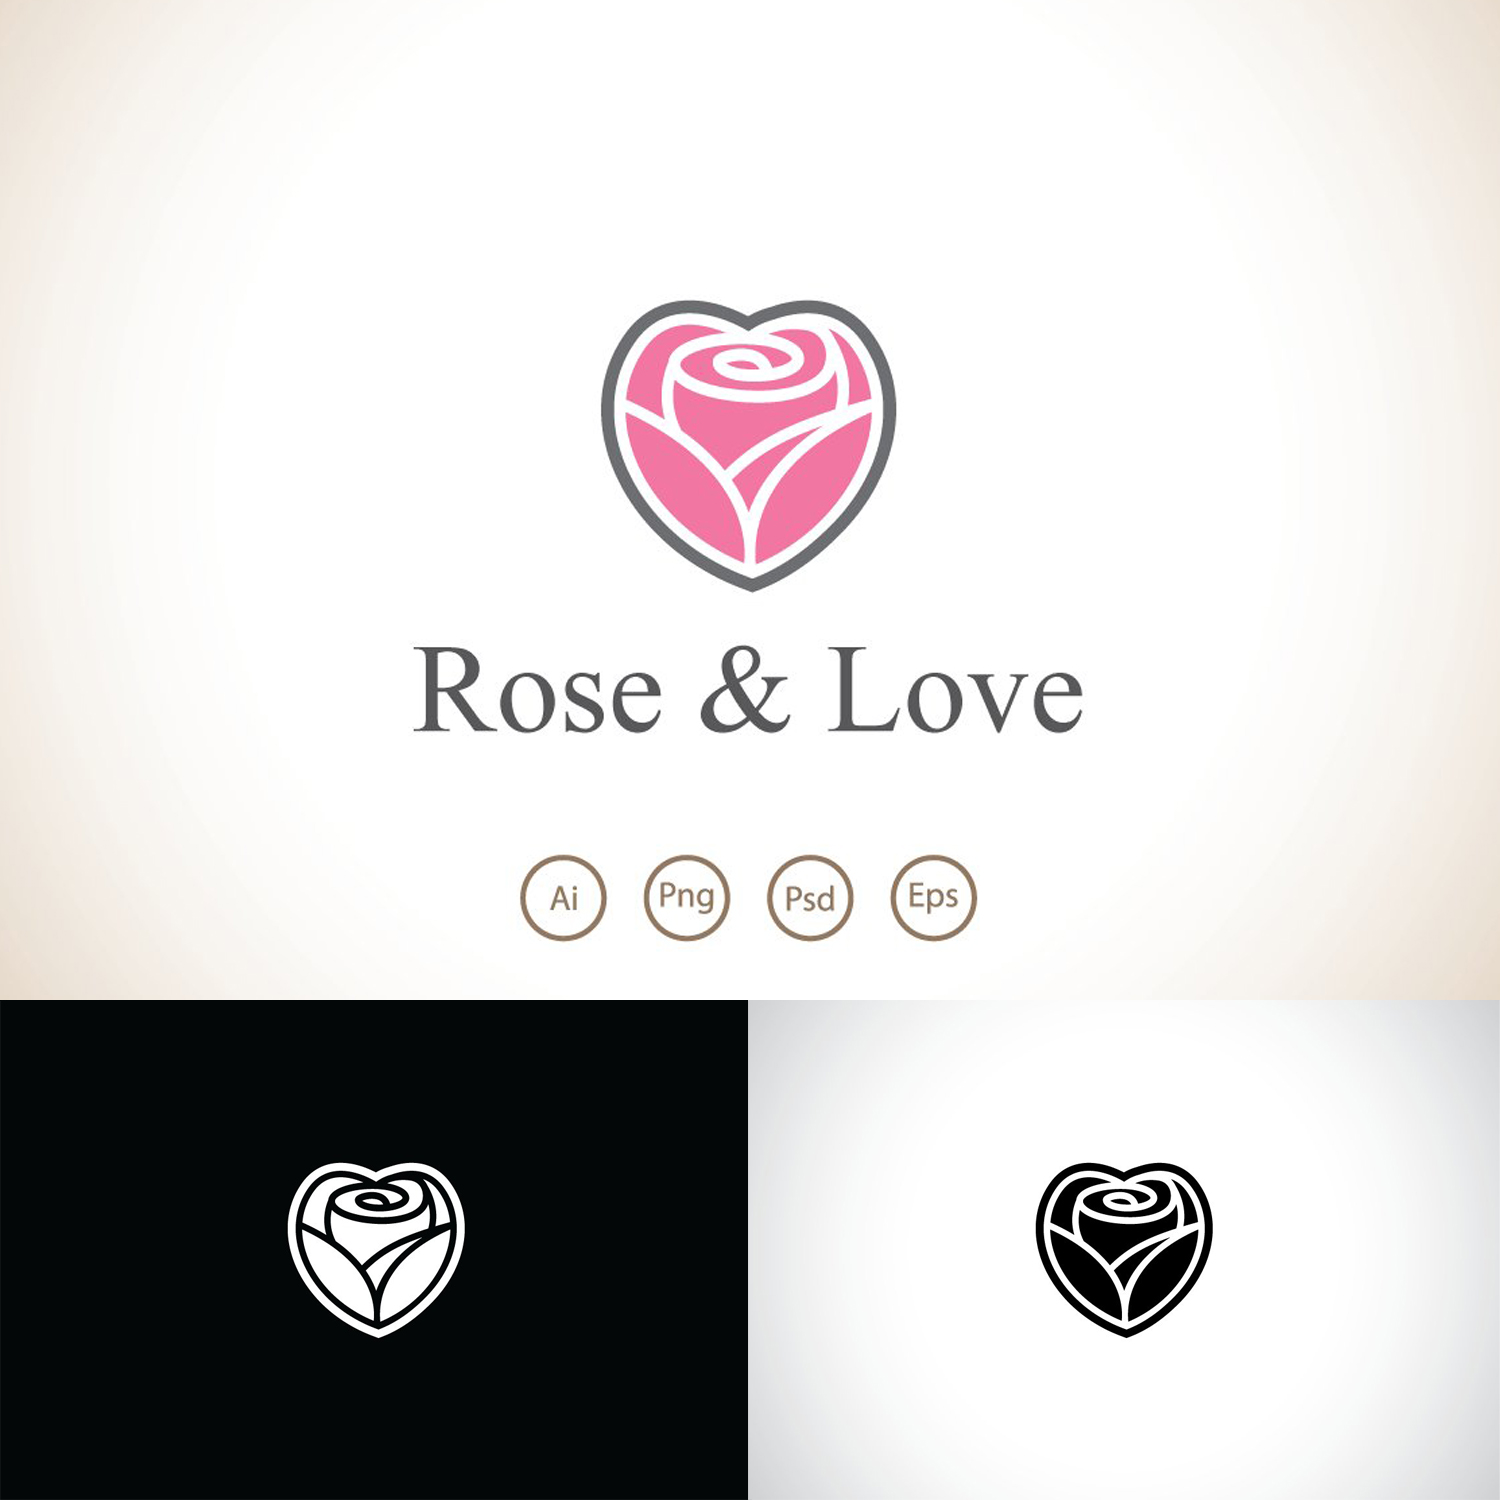 Prints of rose and love logo template.